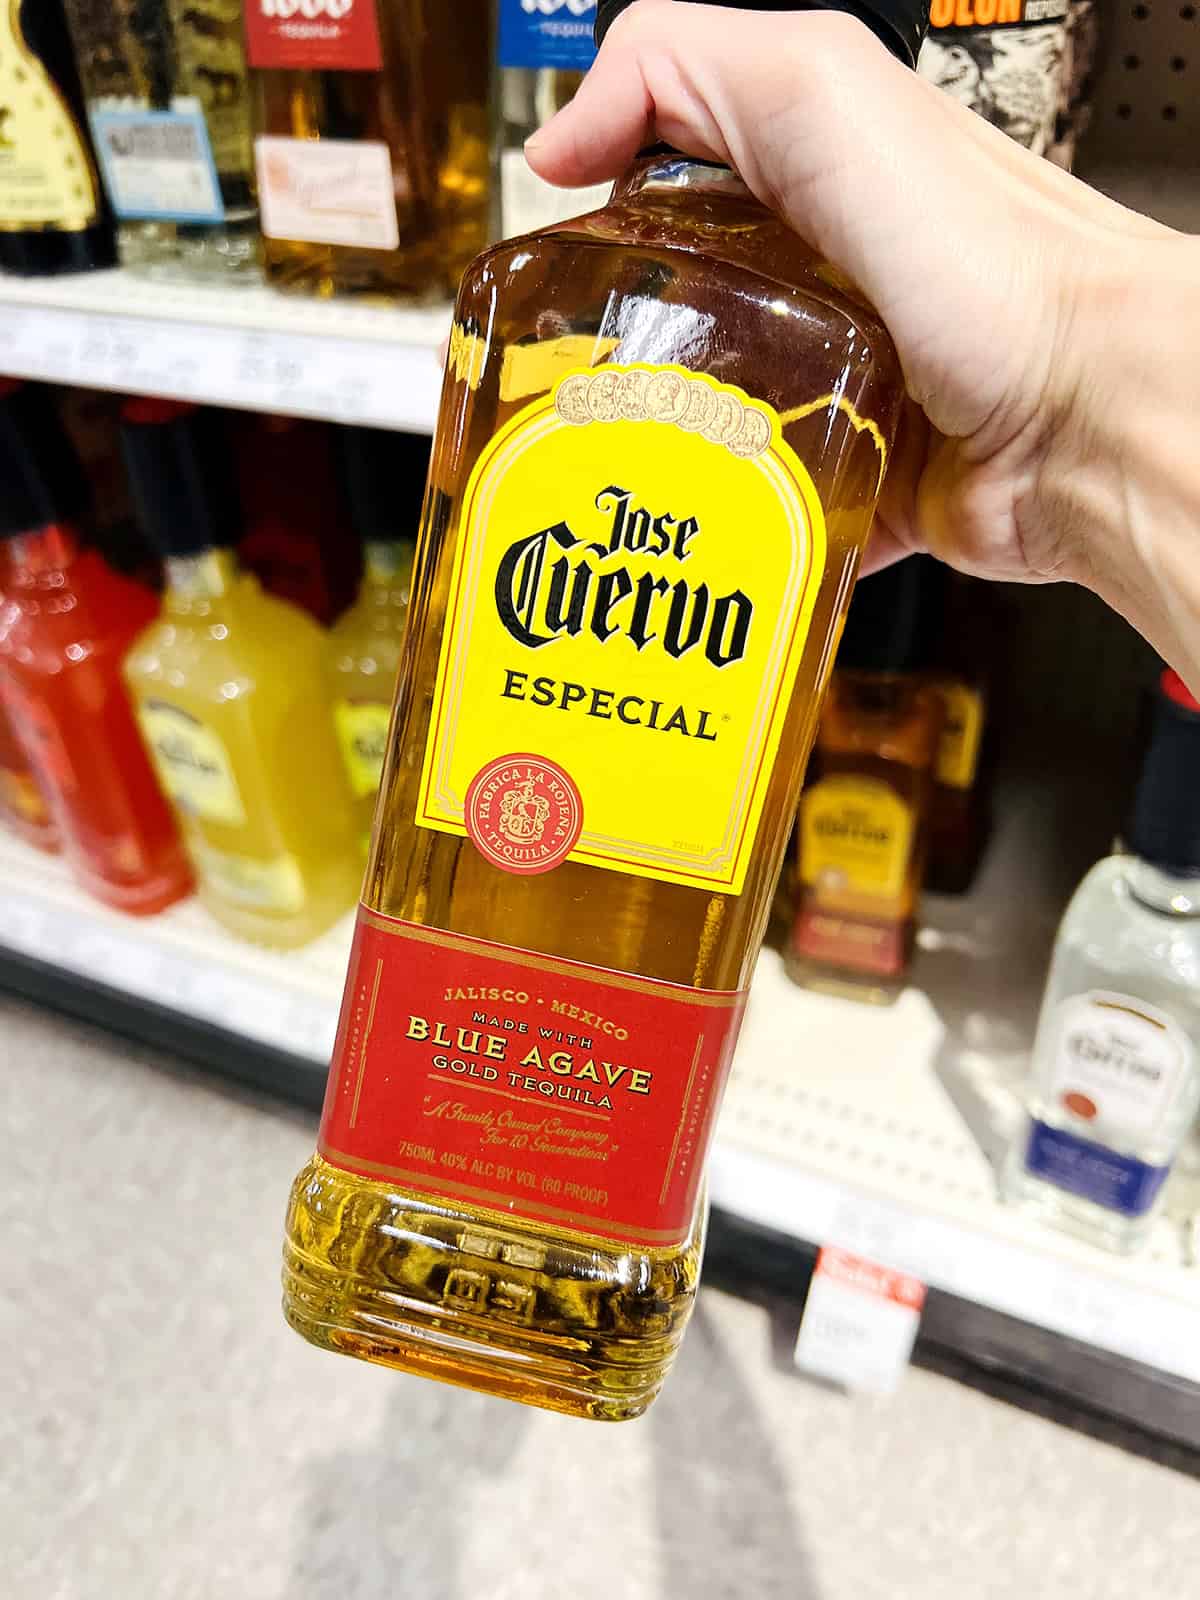 hand holding jose cuervo tequila bottle in grocery store aisle